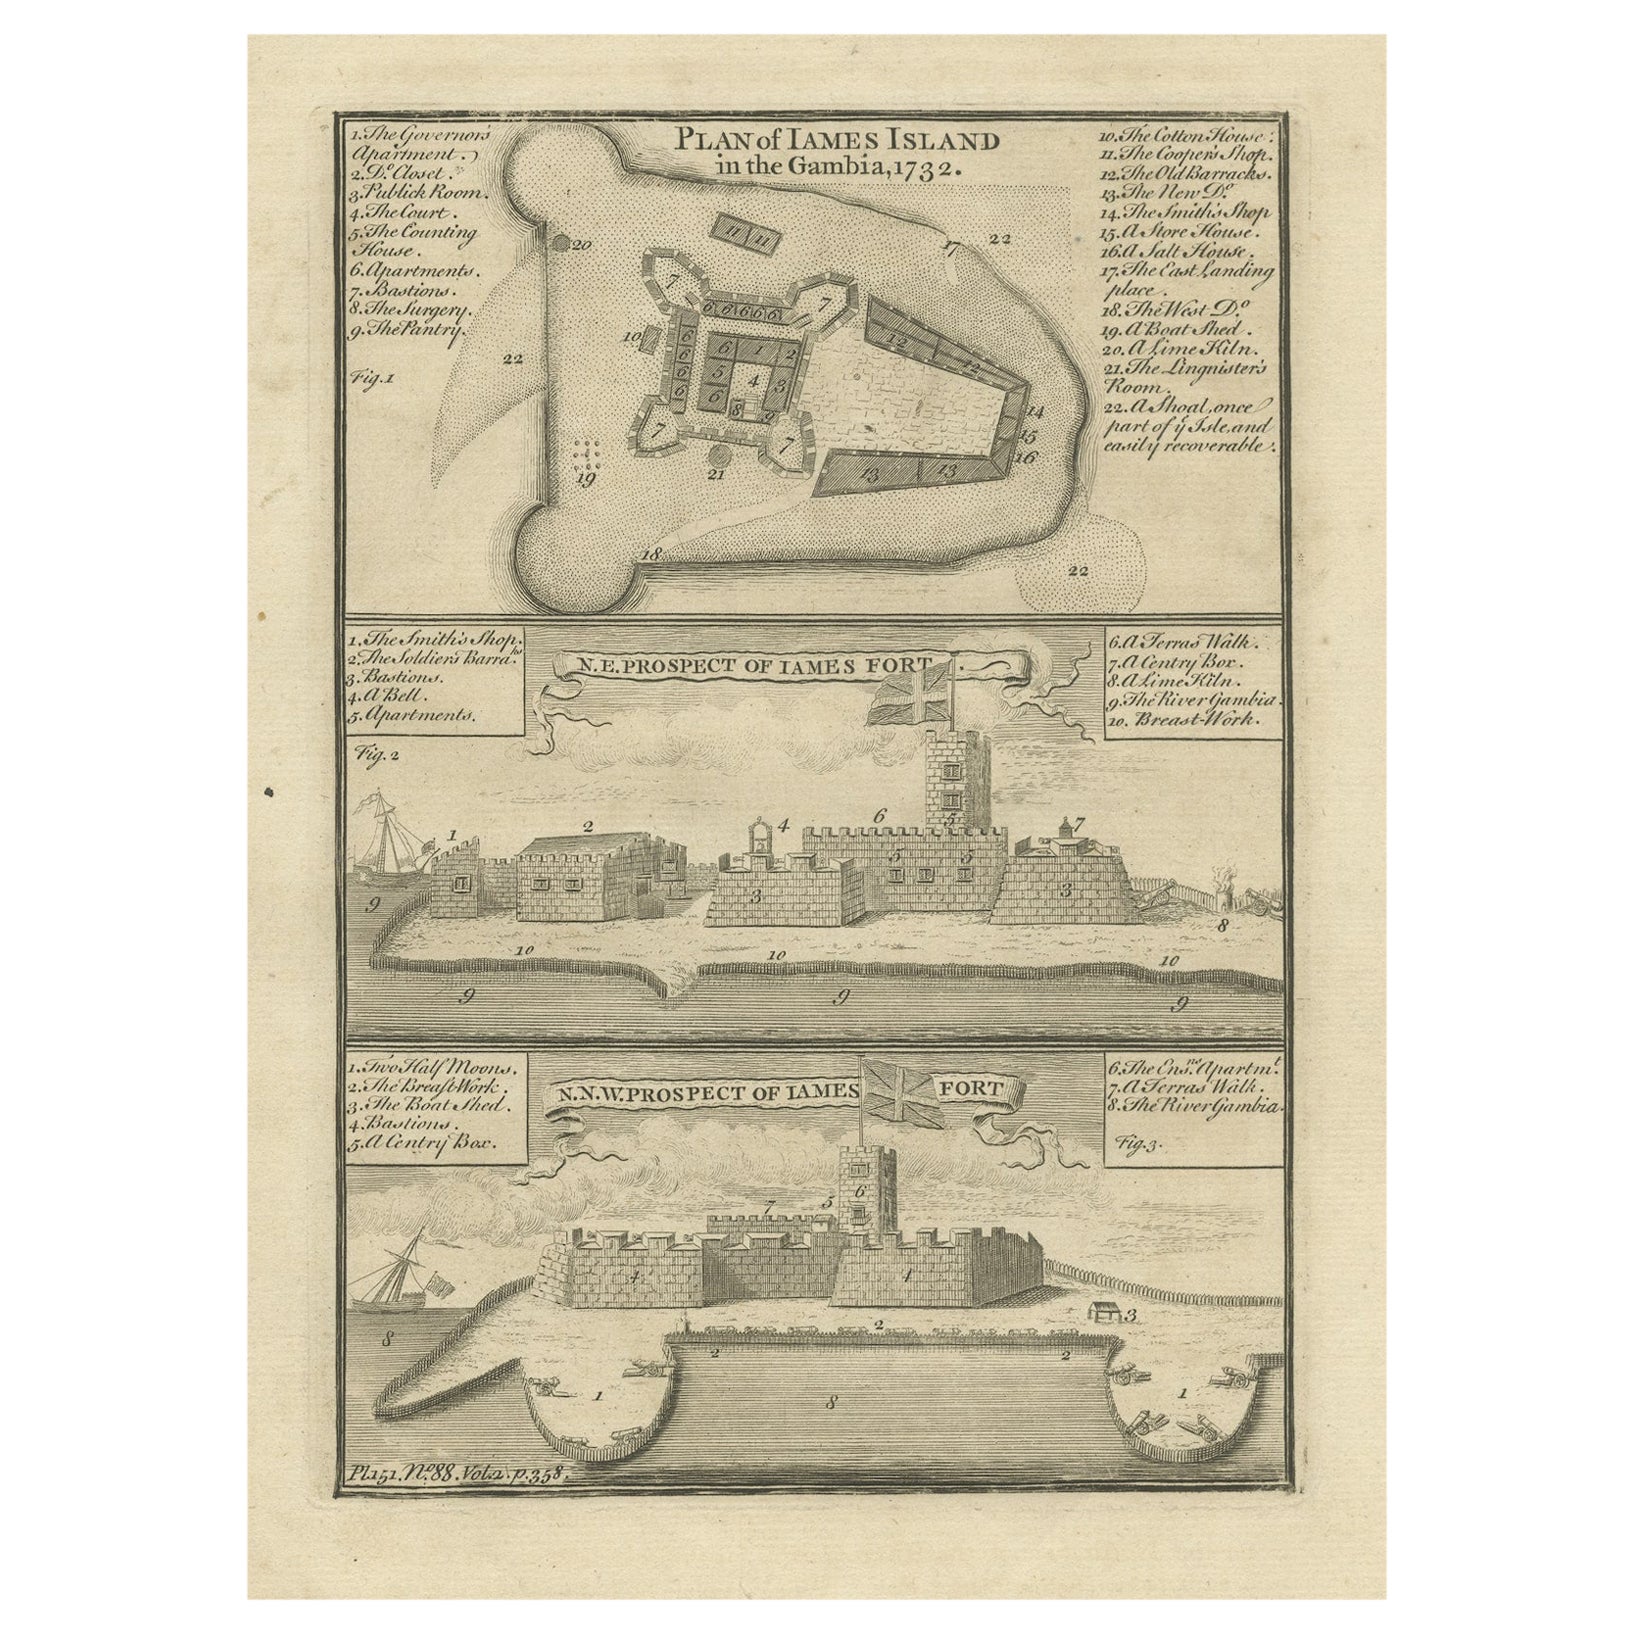 Antique Print with a Plan of Kunta Kinteh Island and views of Fort James, Gambia For Sale